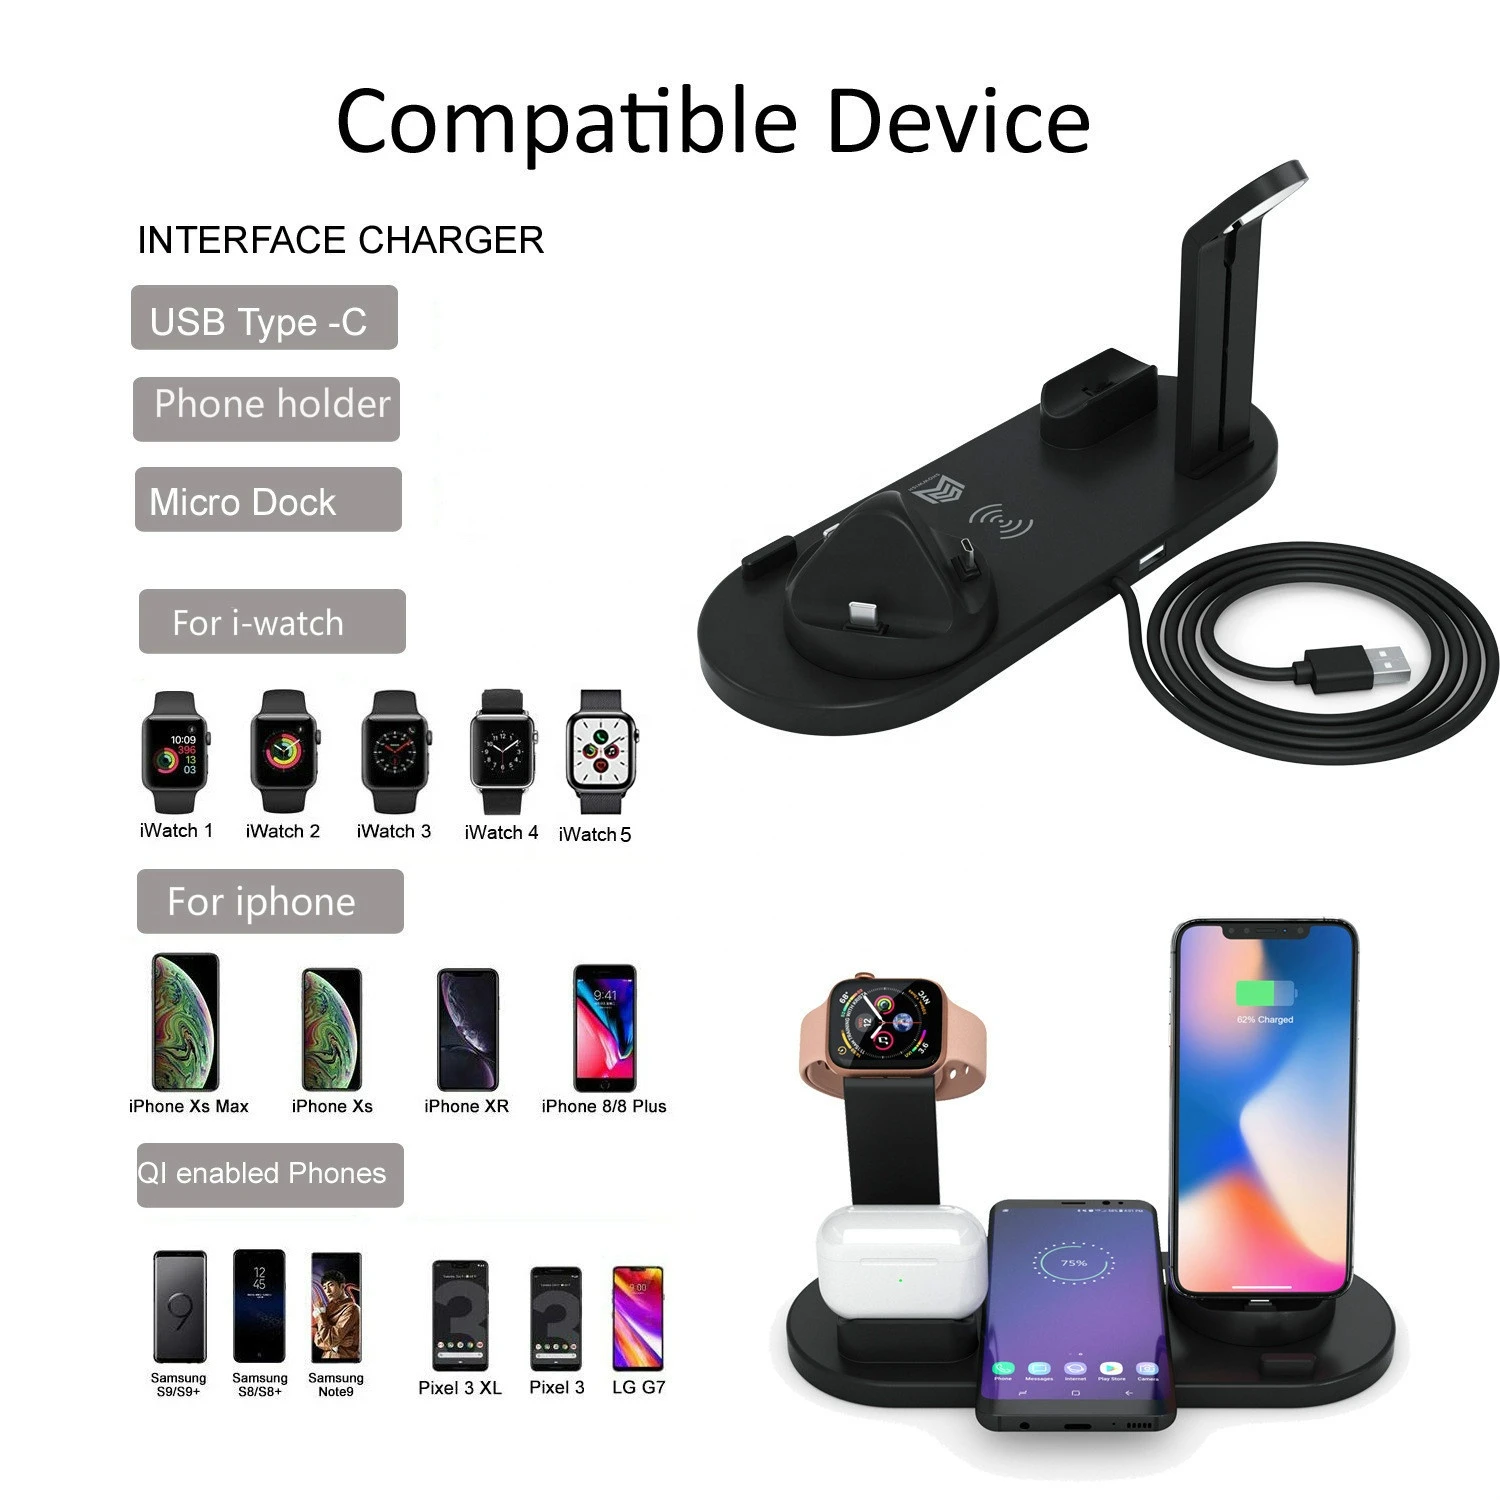 2021 new arrivals 3 in1 qi wireless charger dock cargador inalambrico